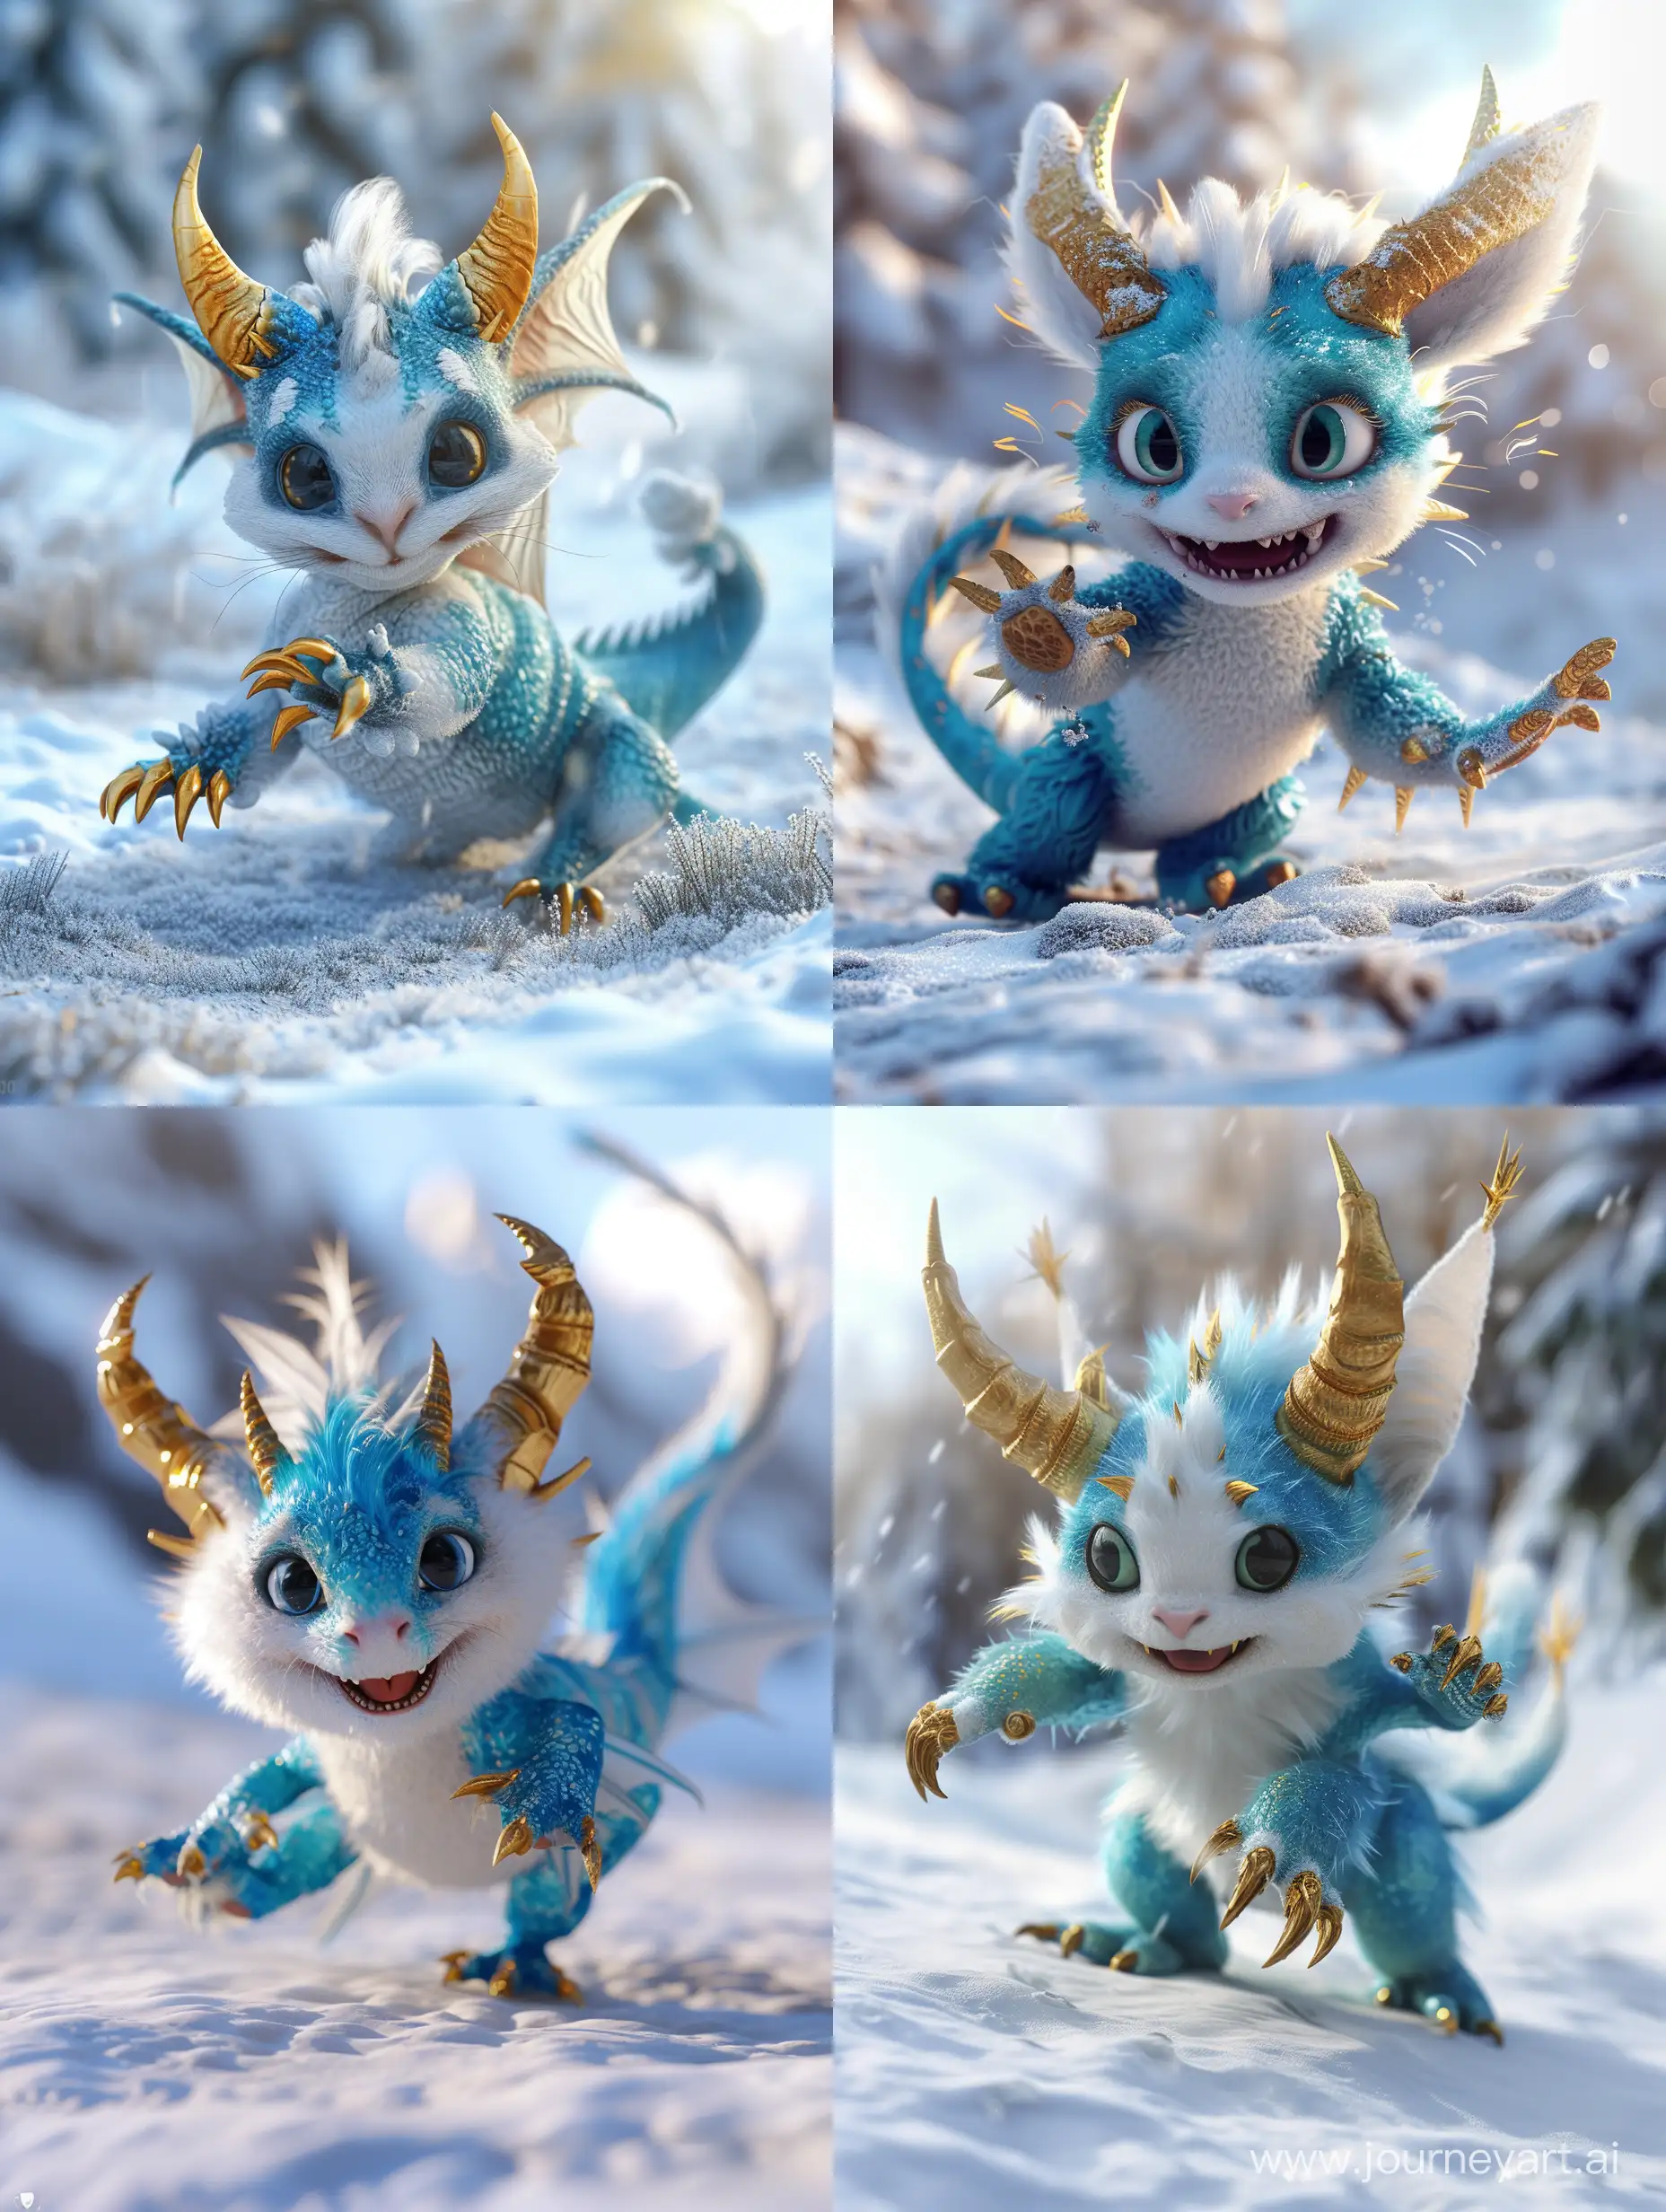 Playful-Baby-Dragon-Frolicking-in-Snowy-Landscape